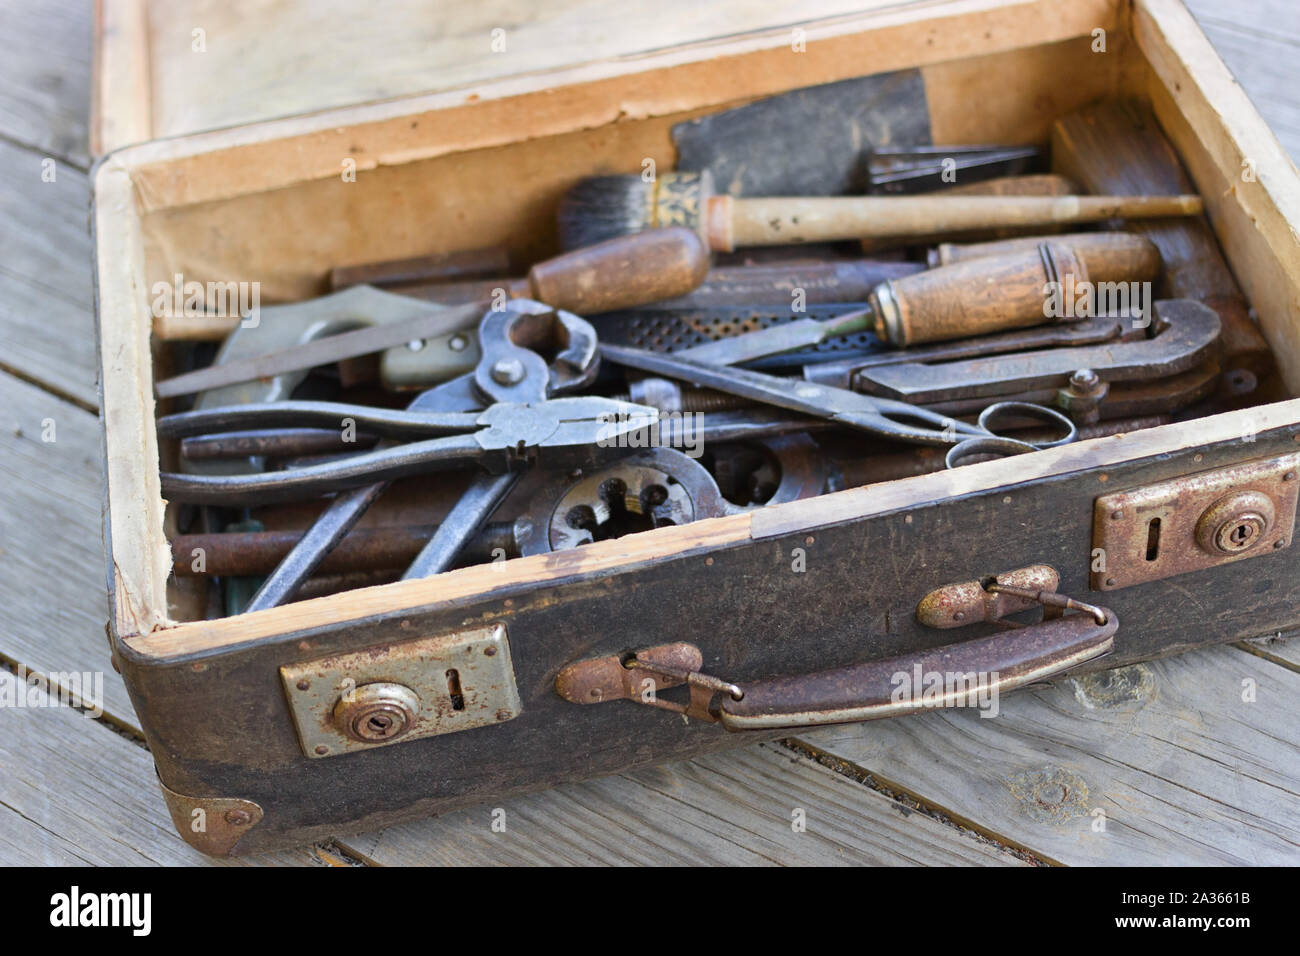 A suitcase with old hand tools on a wooden background. Focus on the suitcase. Stock Photo